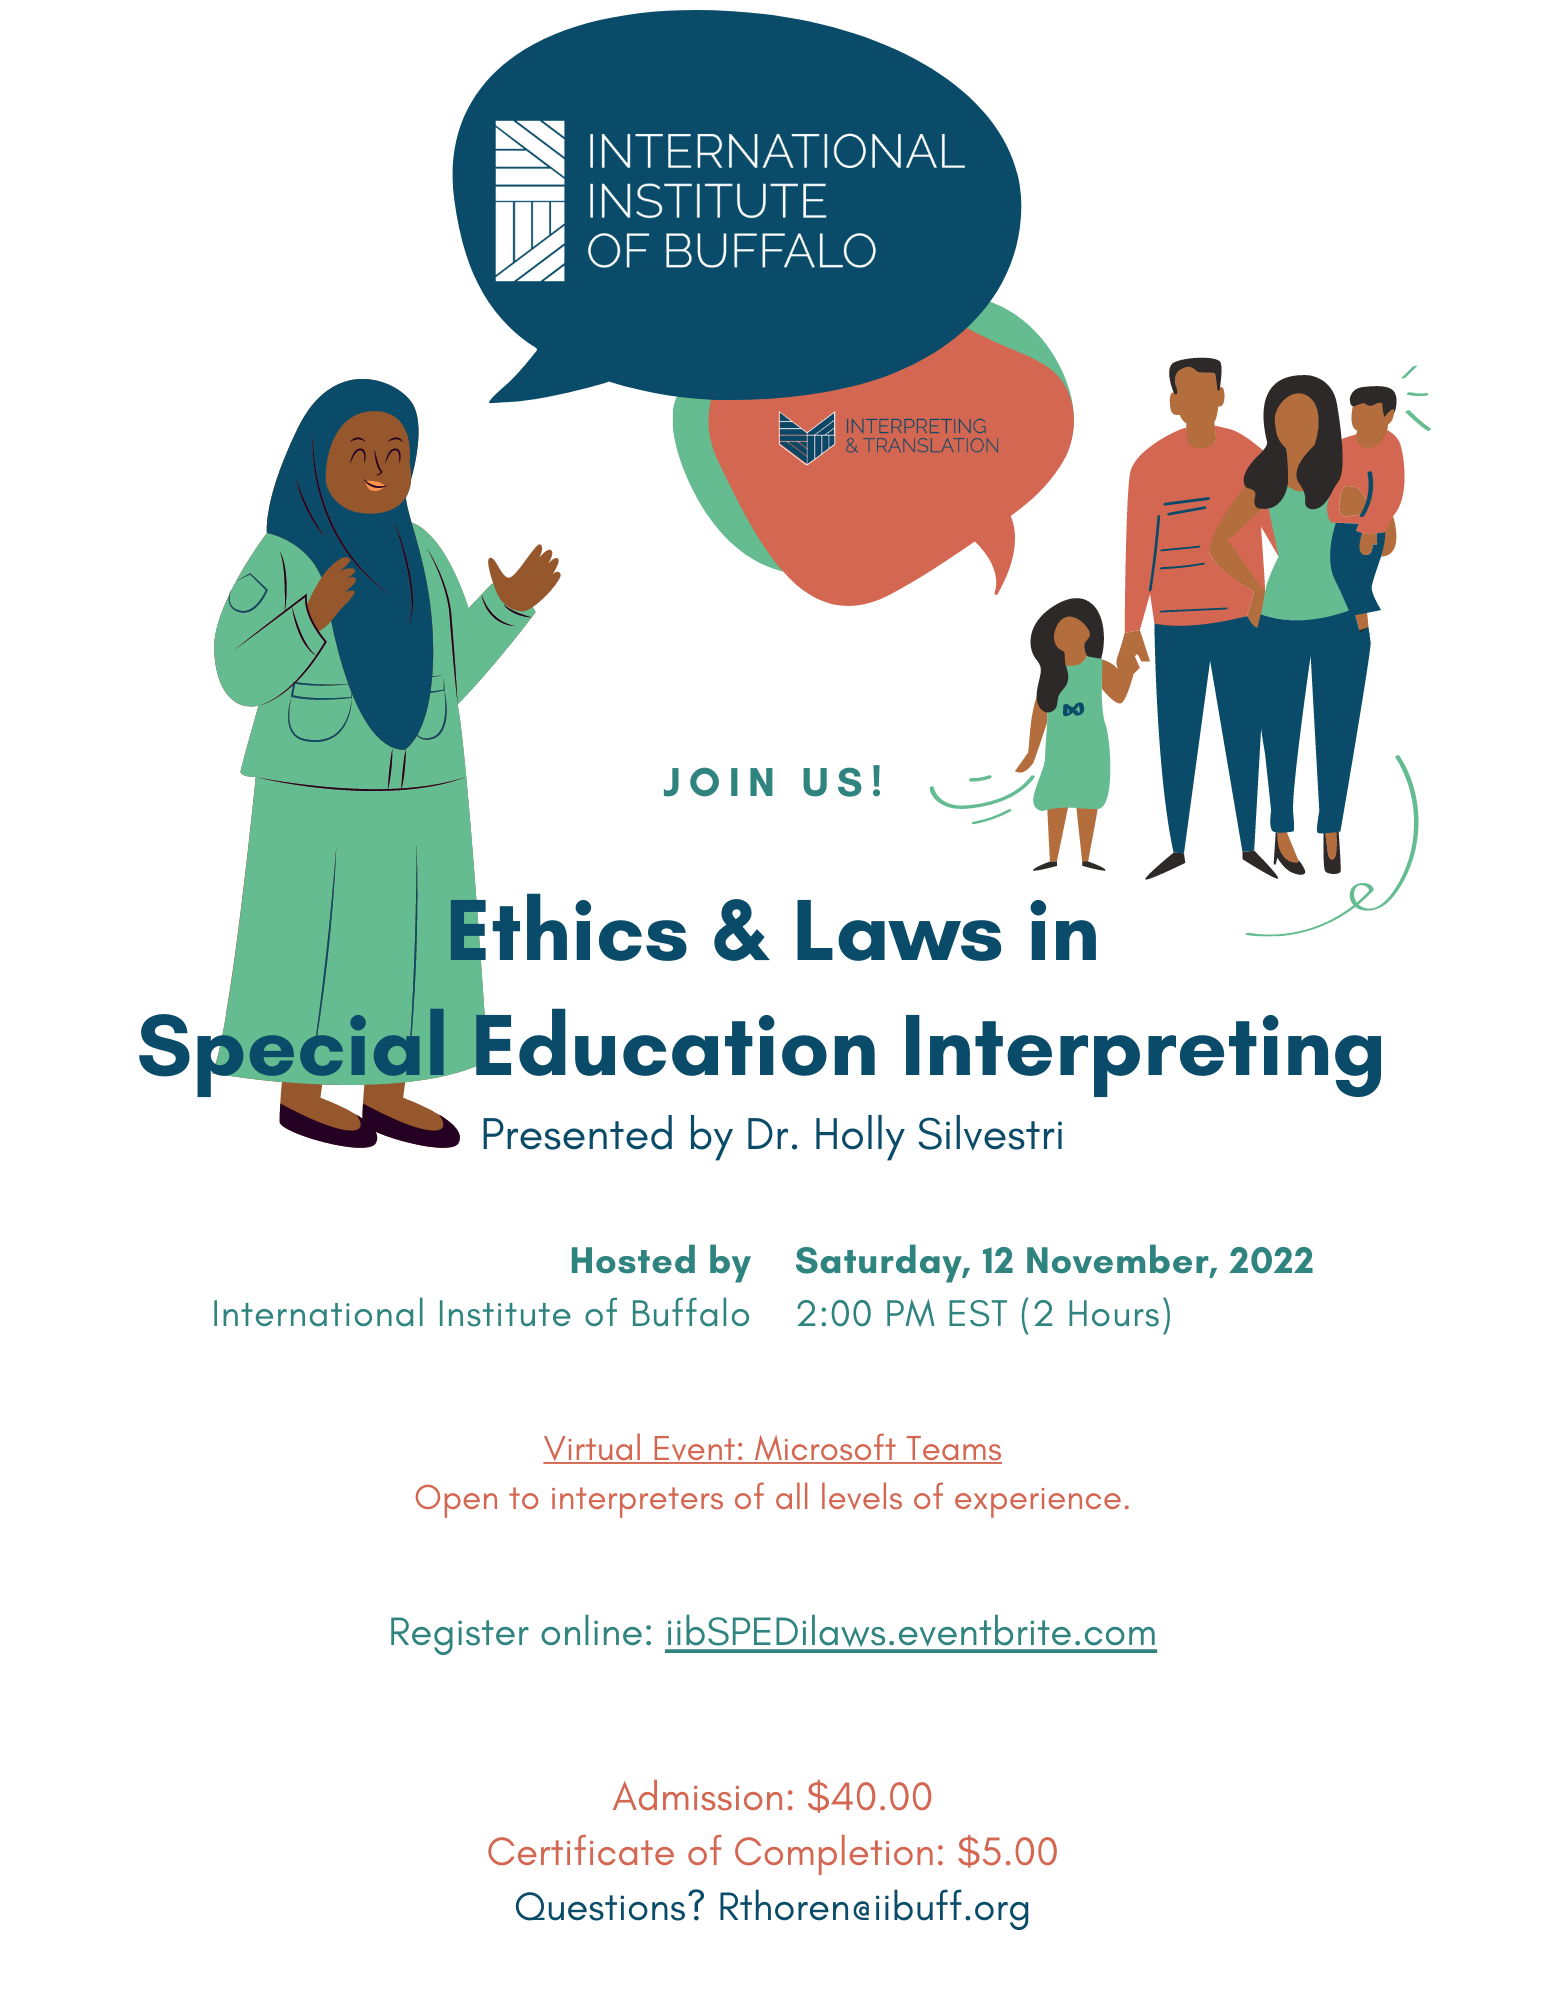 Ethics and Laws in Special Ed Interpreting https://www.eventbrite.com/e/ethics-laws-in-special-education-interpreting-by-dr-holly-silvestri-tickets-410020641777